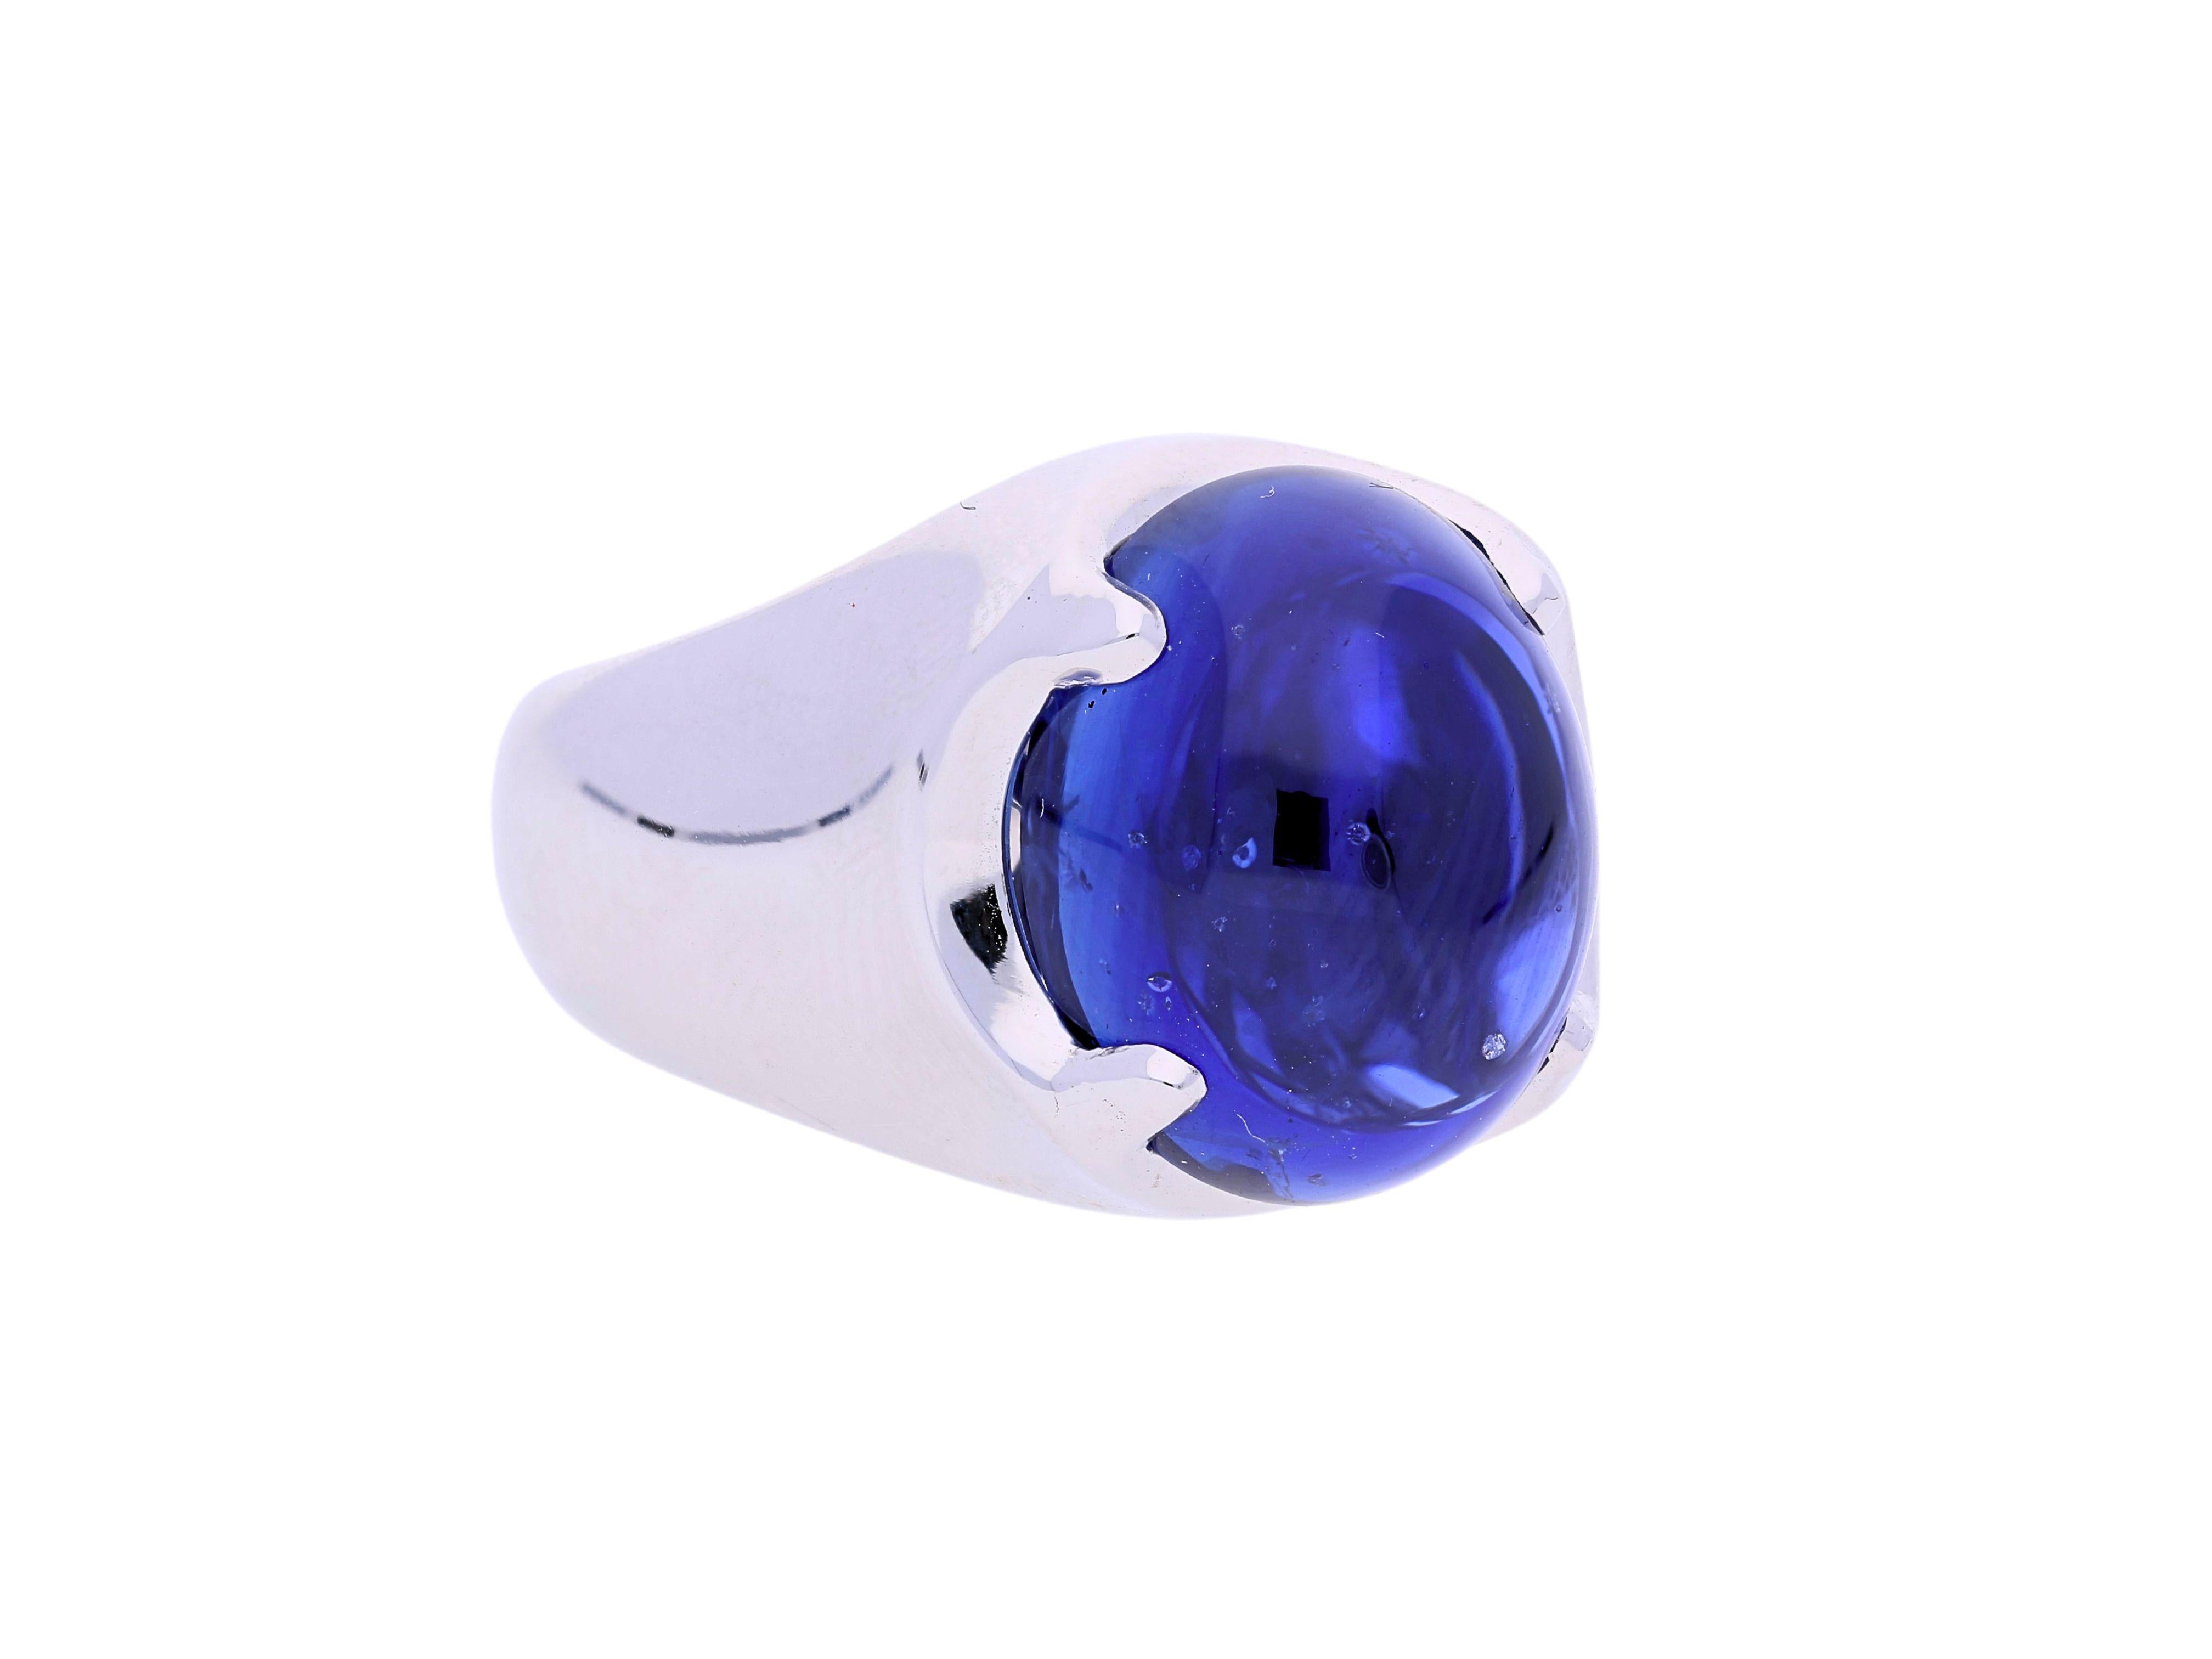 29.51 Carat No Heat Ceylon Blue Sapphire Cabochon Solitaire Mens Ring in 18K White Gold. AGL Certified. 

Jewelry Details:
- Item Type: Solitaire Ring
- Metal Type: 18K White Gold
- Weight: 25.81 grams
- Ring Size: 8 (adjustable)

Center Stone